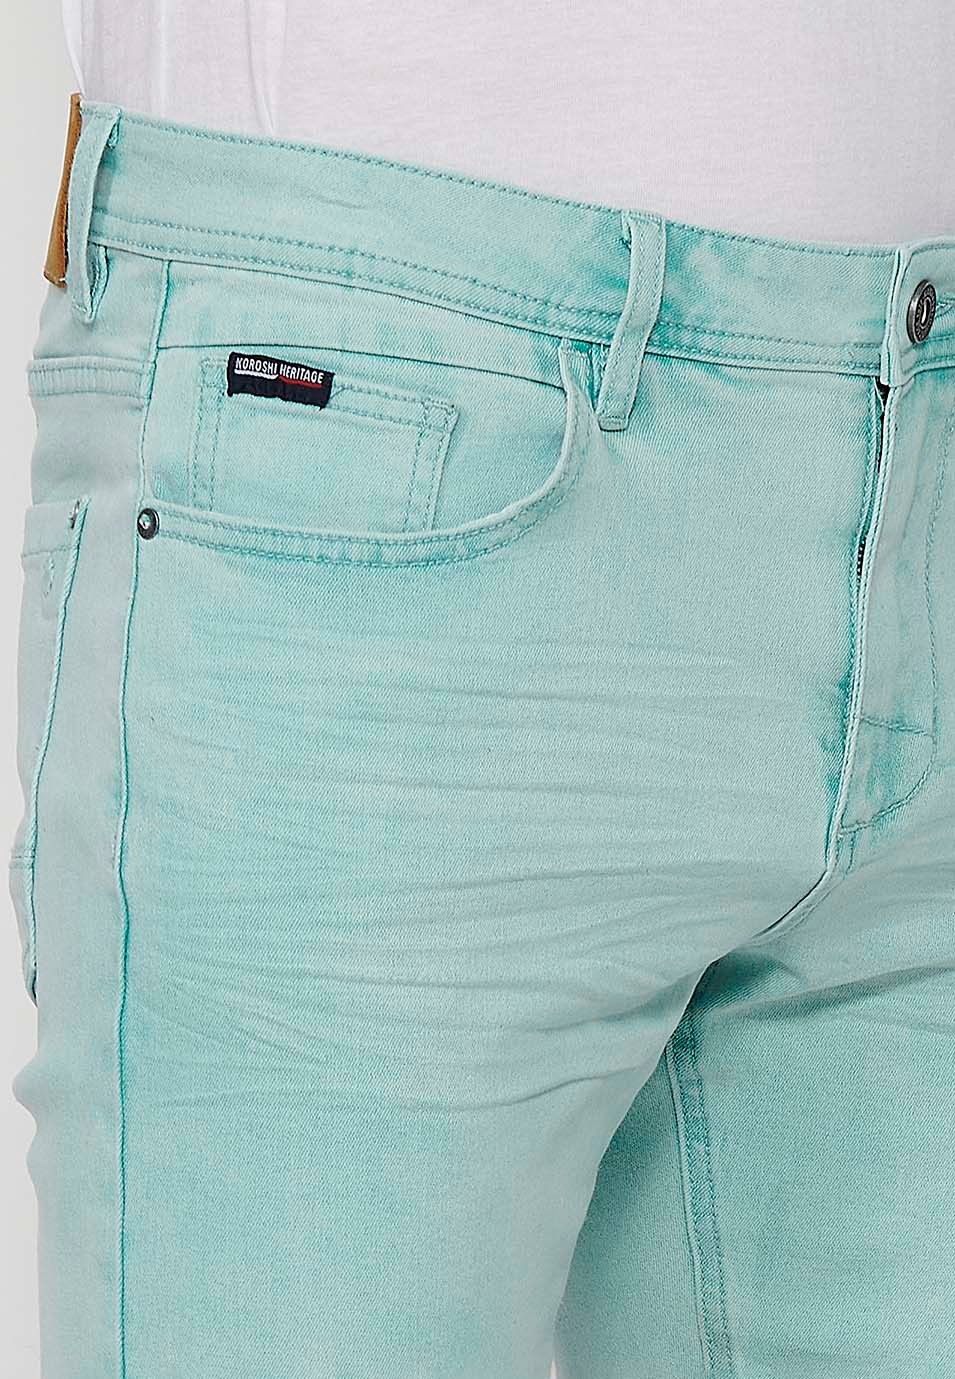 Shorts with turn-up closure with front zipper and button closure and five pockets, one blue pocket pocket for Men 3